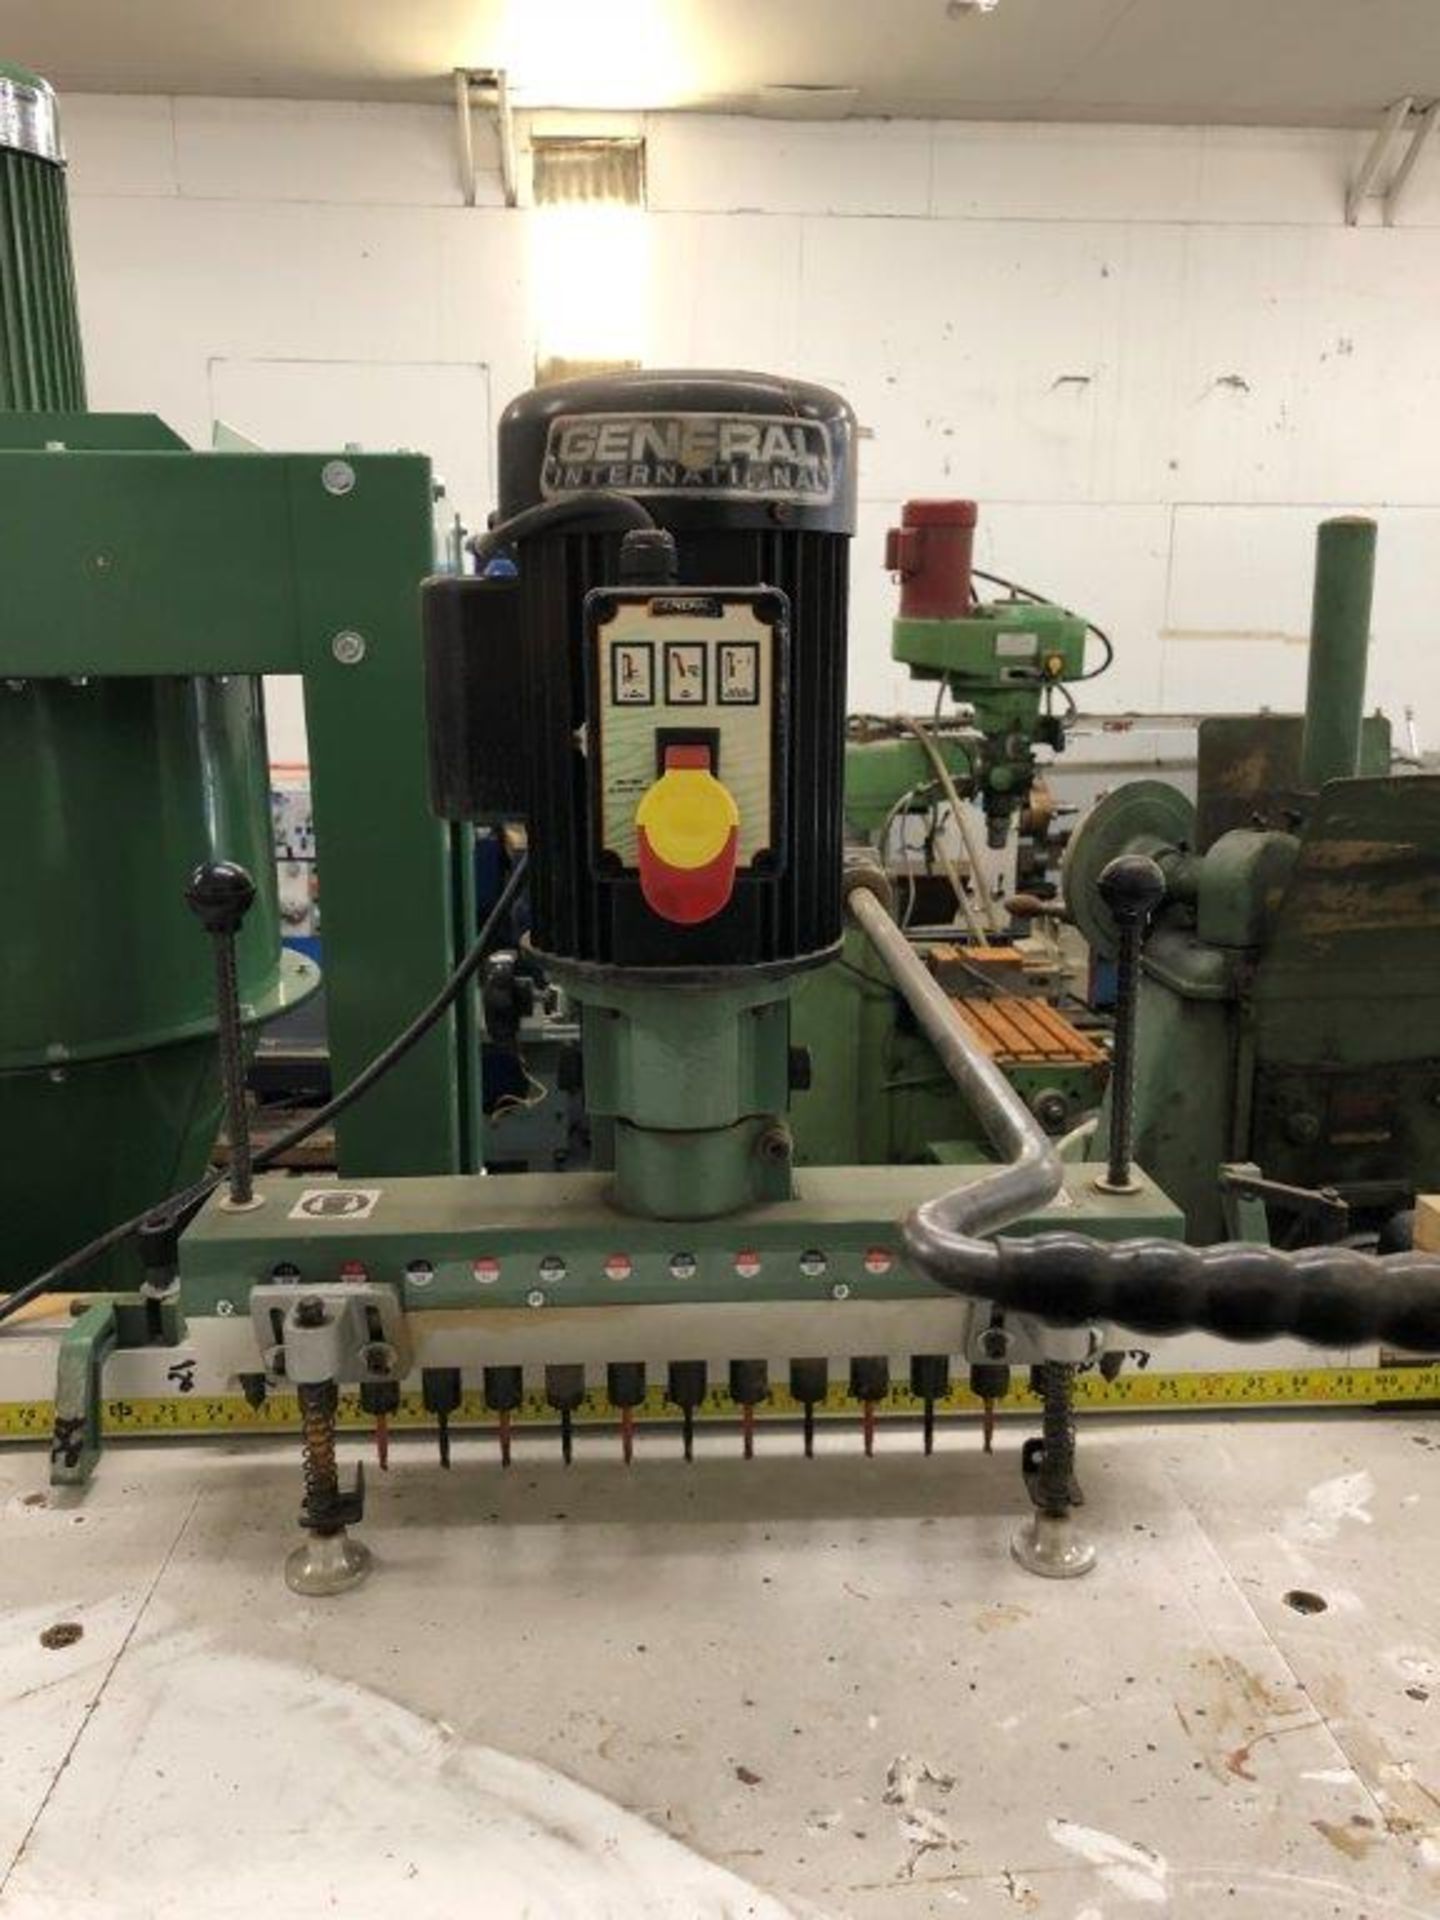 GENERAL 13" SPINDLE BORING MACHINE, mod: 75-440M1, 110 V, 14 A, 1.5 HP, 3450 RPM - Image 4 of 11